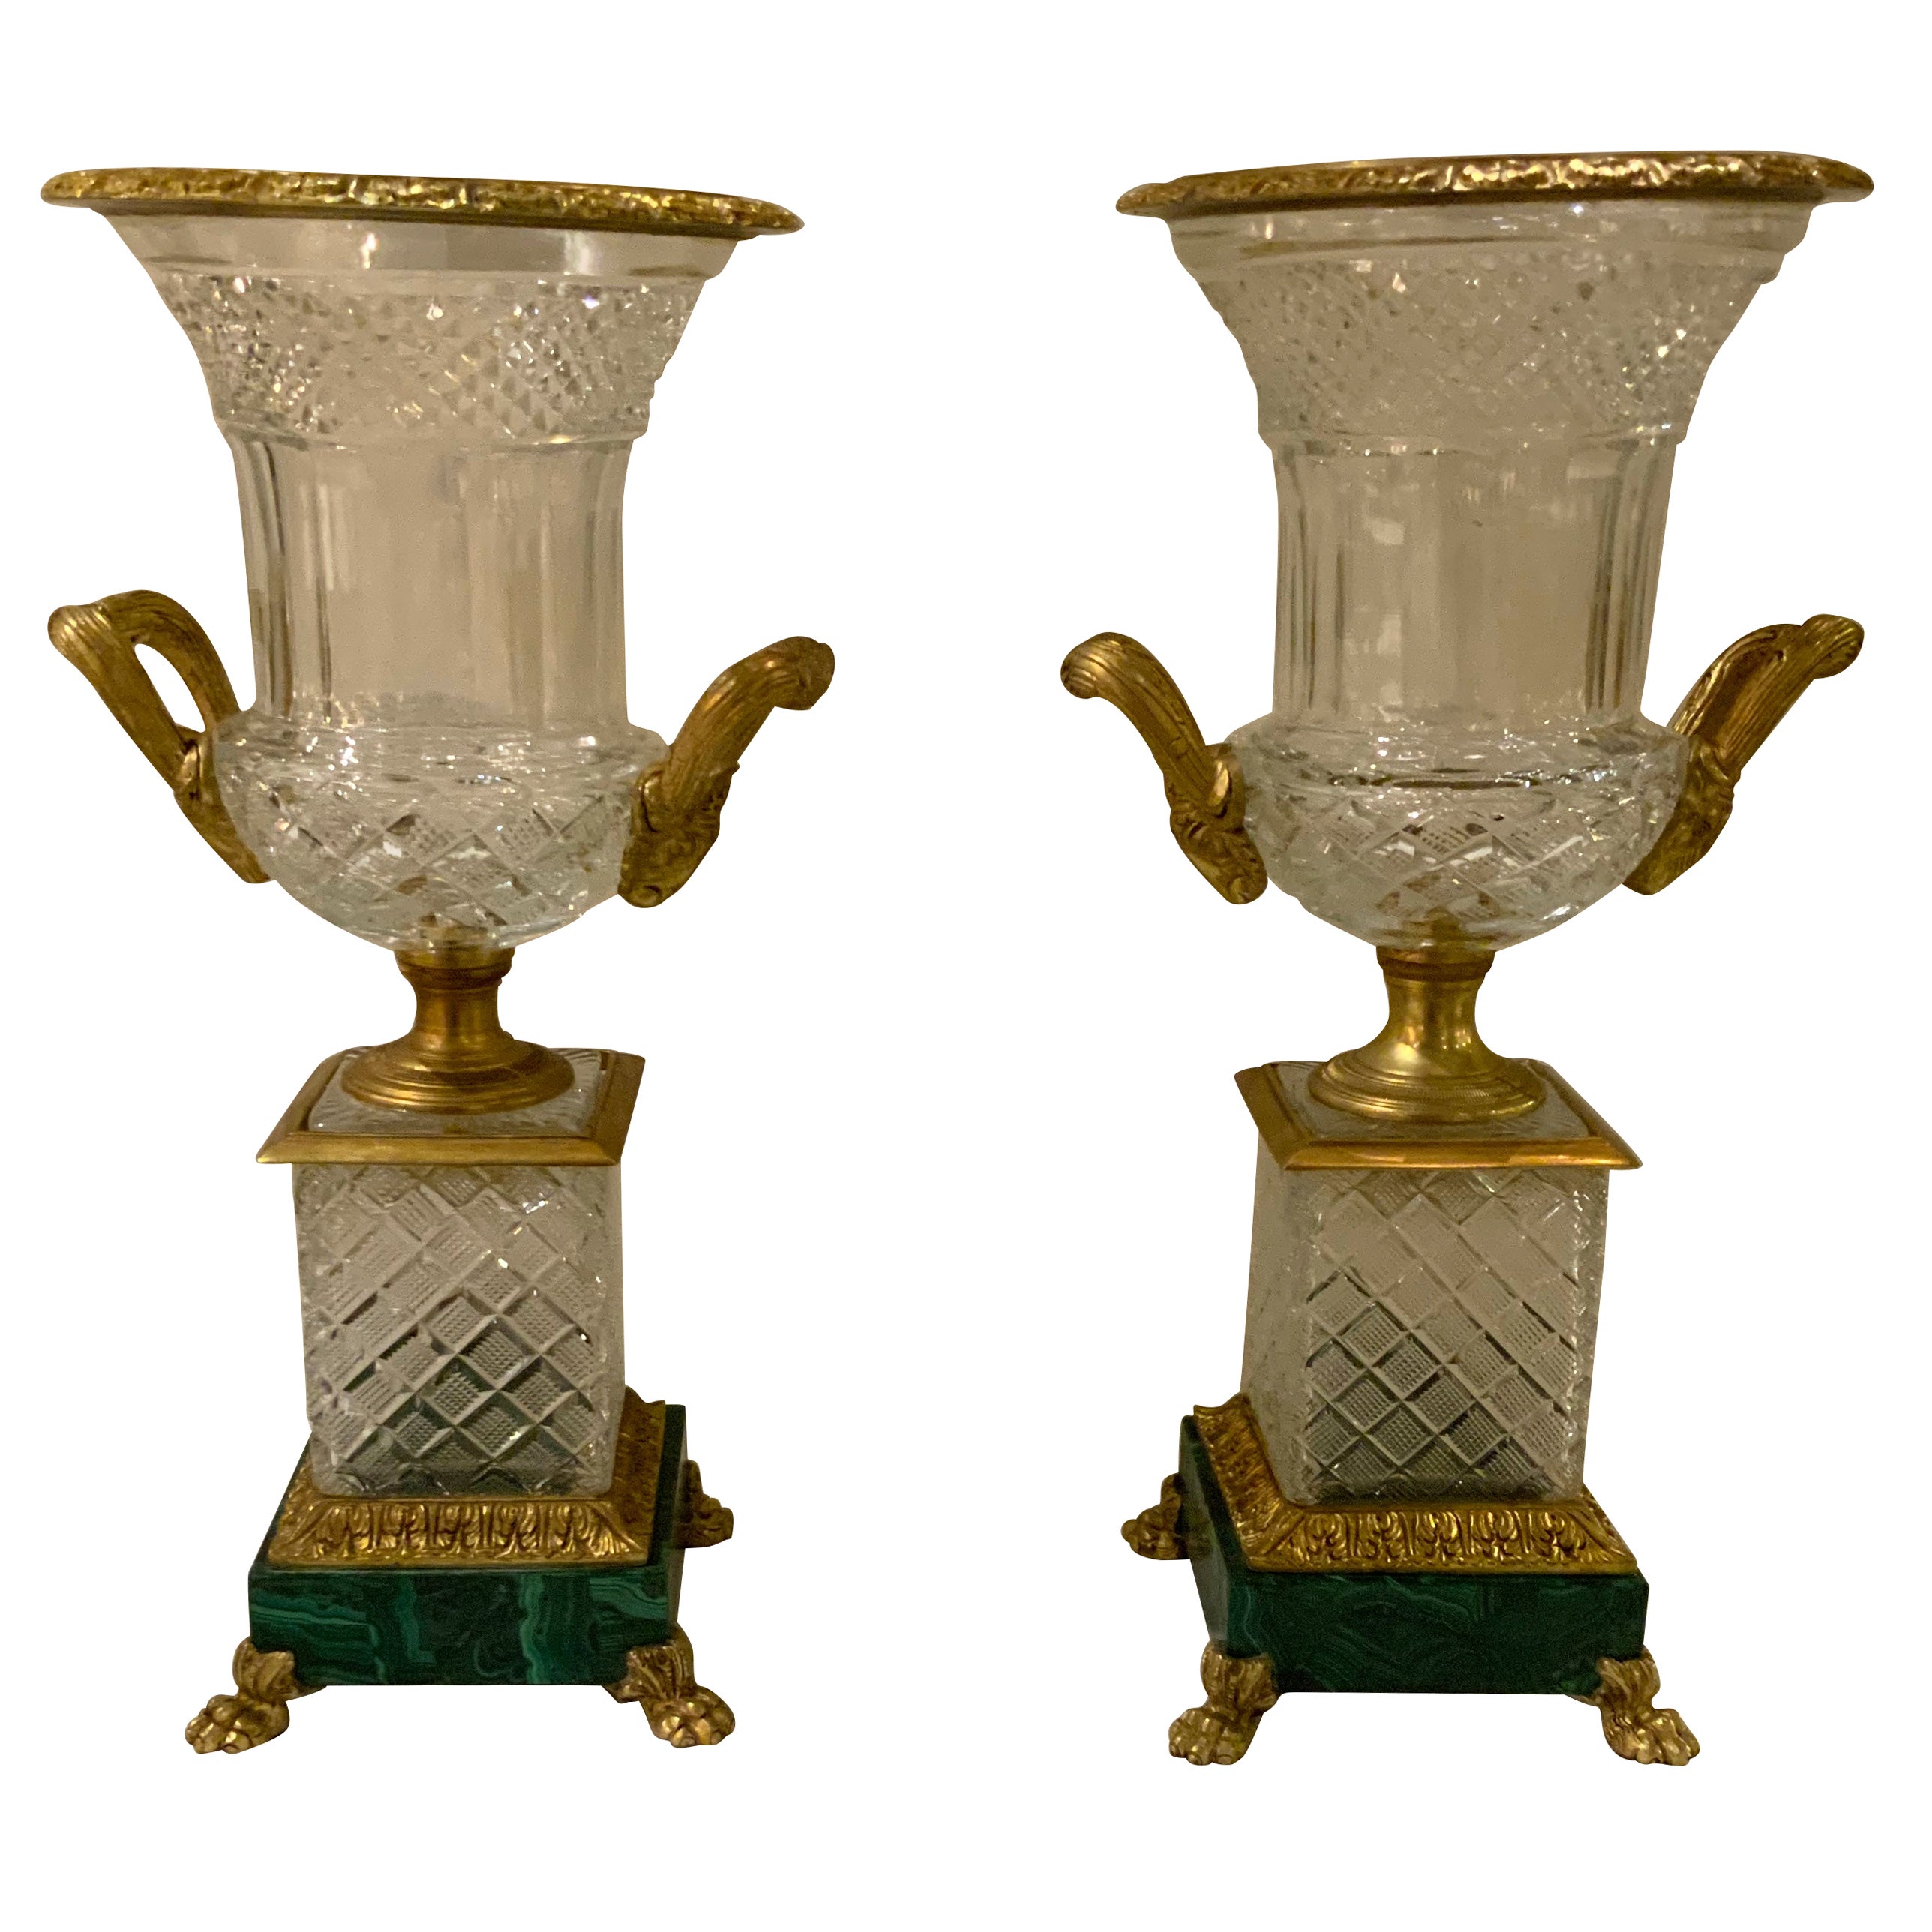 Pair of French Baccarat Style Cut Crystal Urns, Bronze Dore Mounts on Malachite